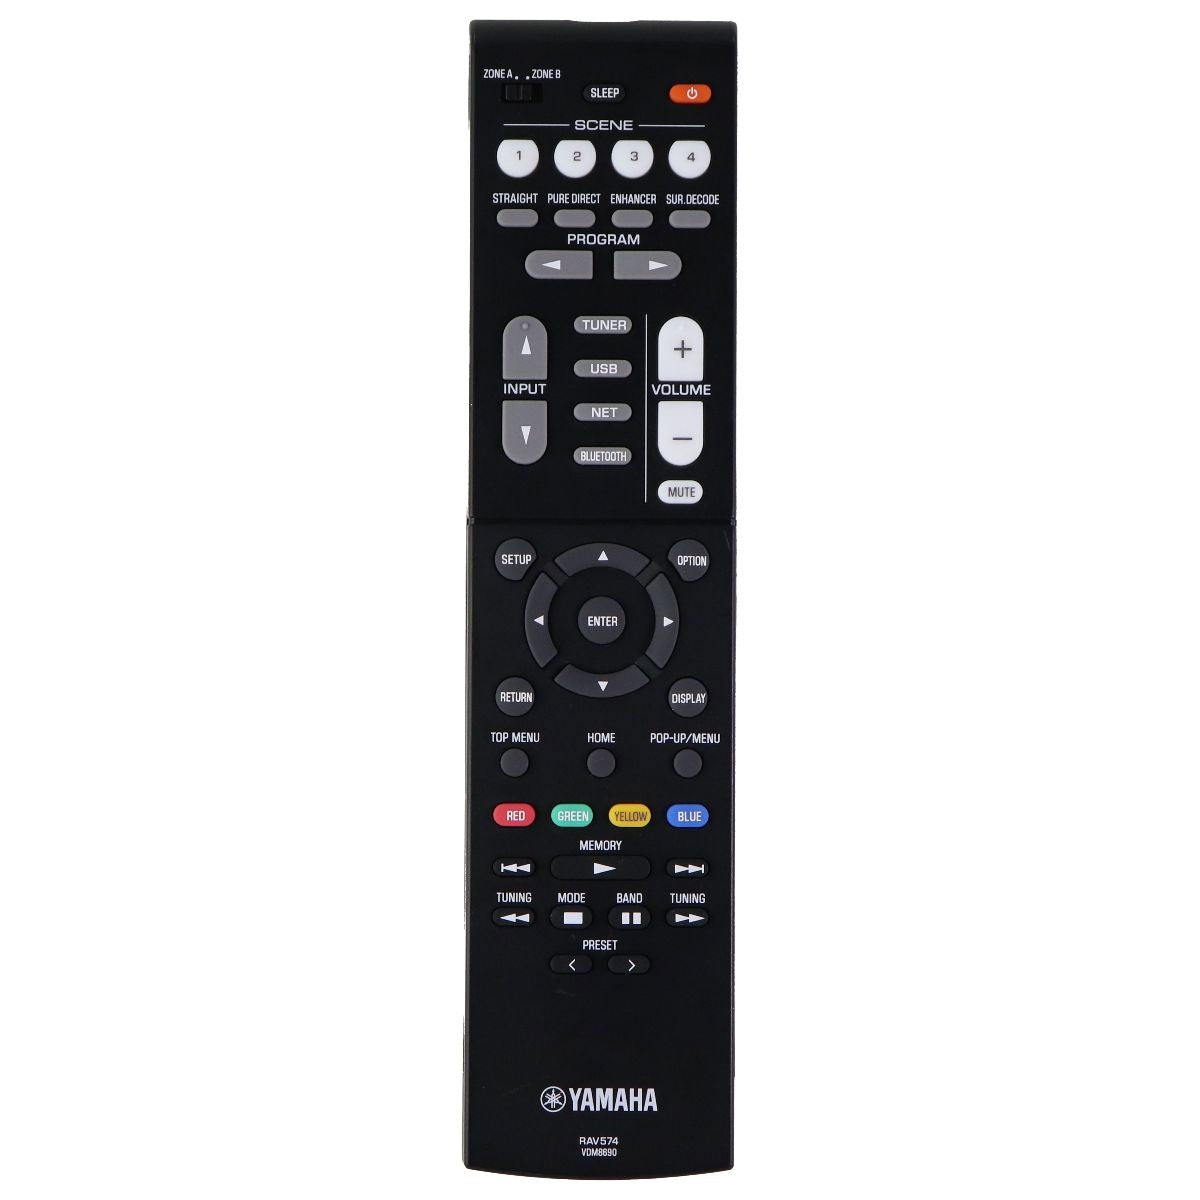 Yamaha Remote Control (RAV574 / VDM8690) for the Yamaha RX-V4A (2020) - Black TV, Video & Audio Accessories - Remote Controls Yamaha    - Simple Cell Bulk Wholesale Pricing - USA Seller